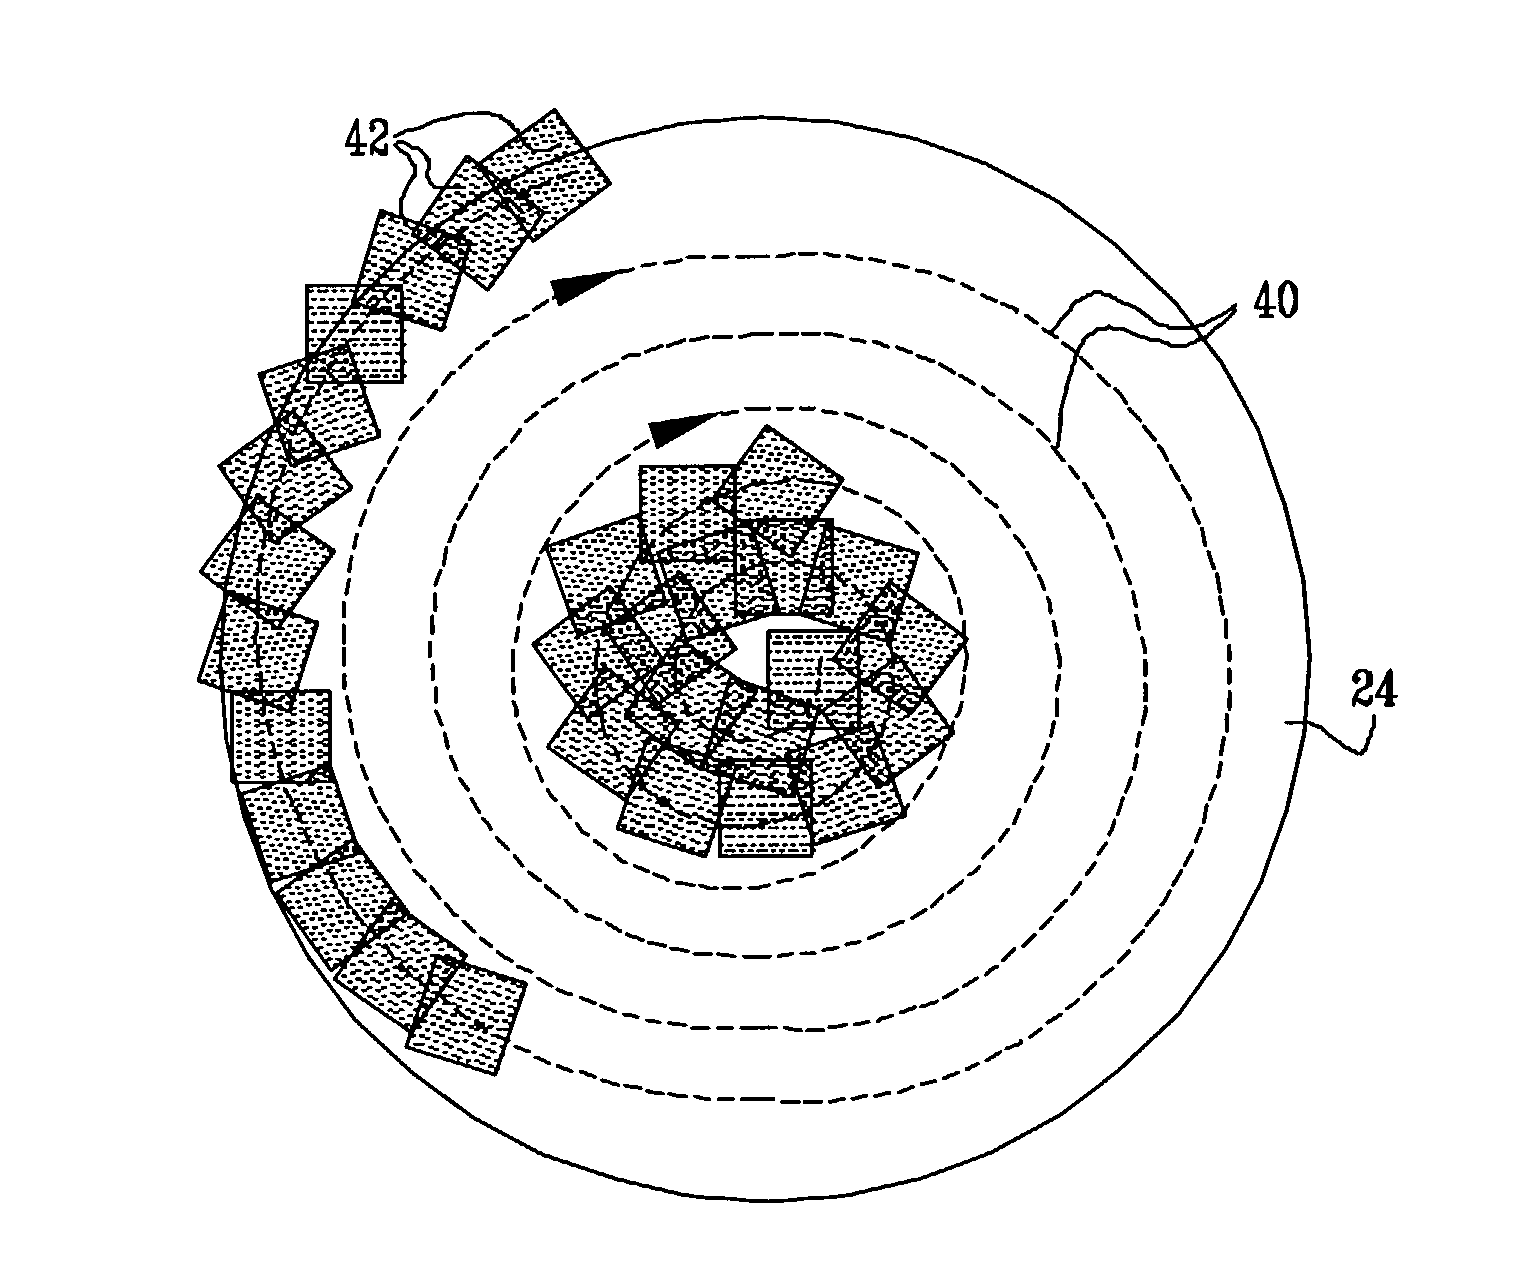 System for imaging an extended area